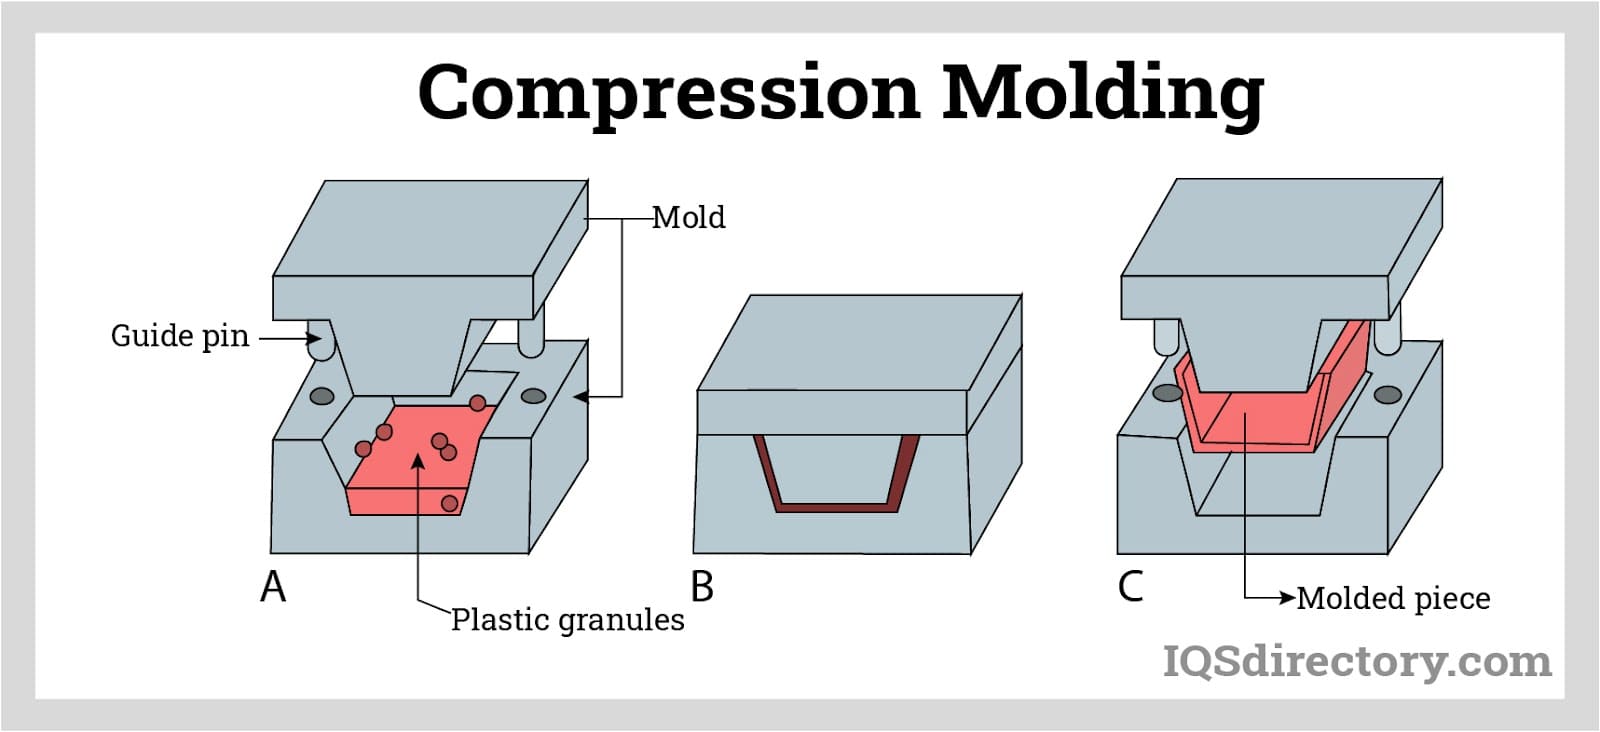 A simple breakdown of mold components